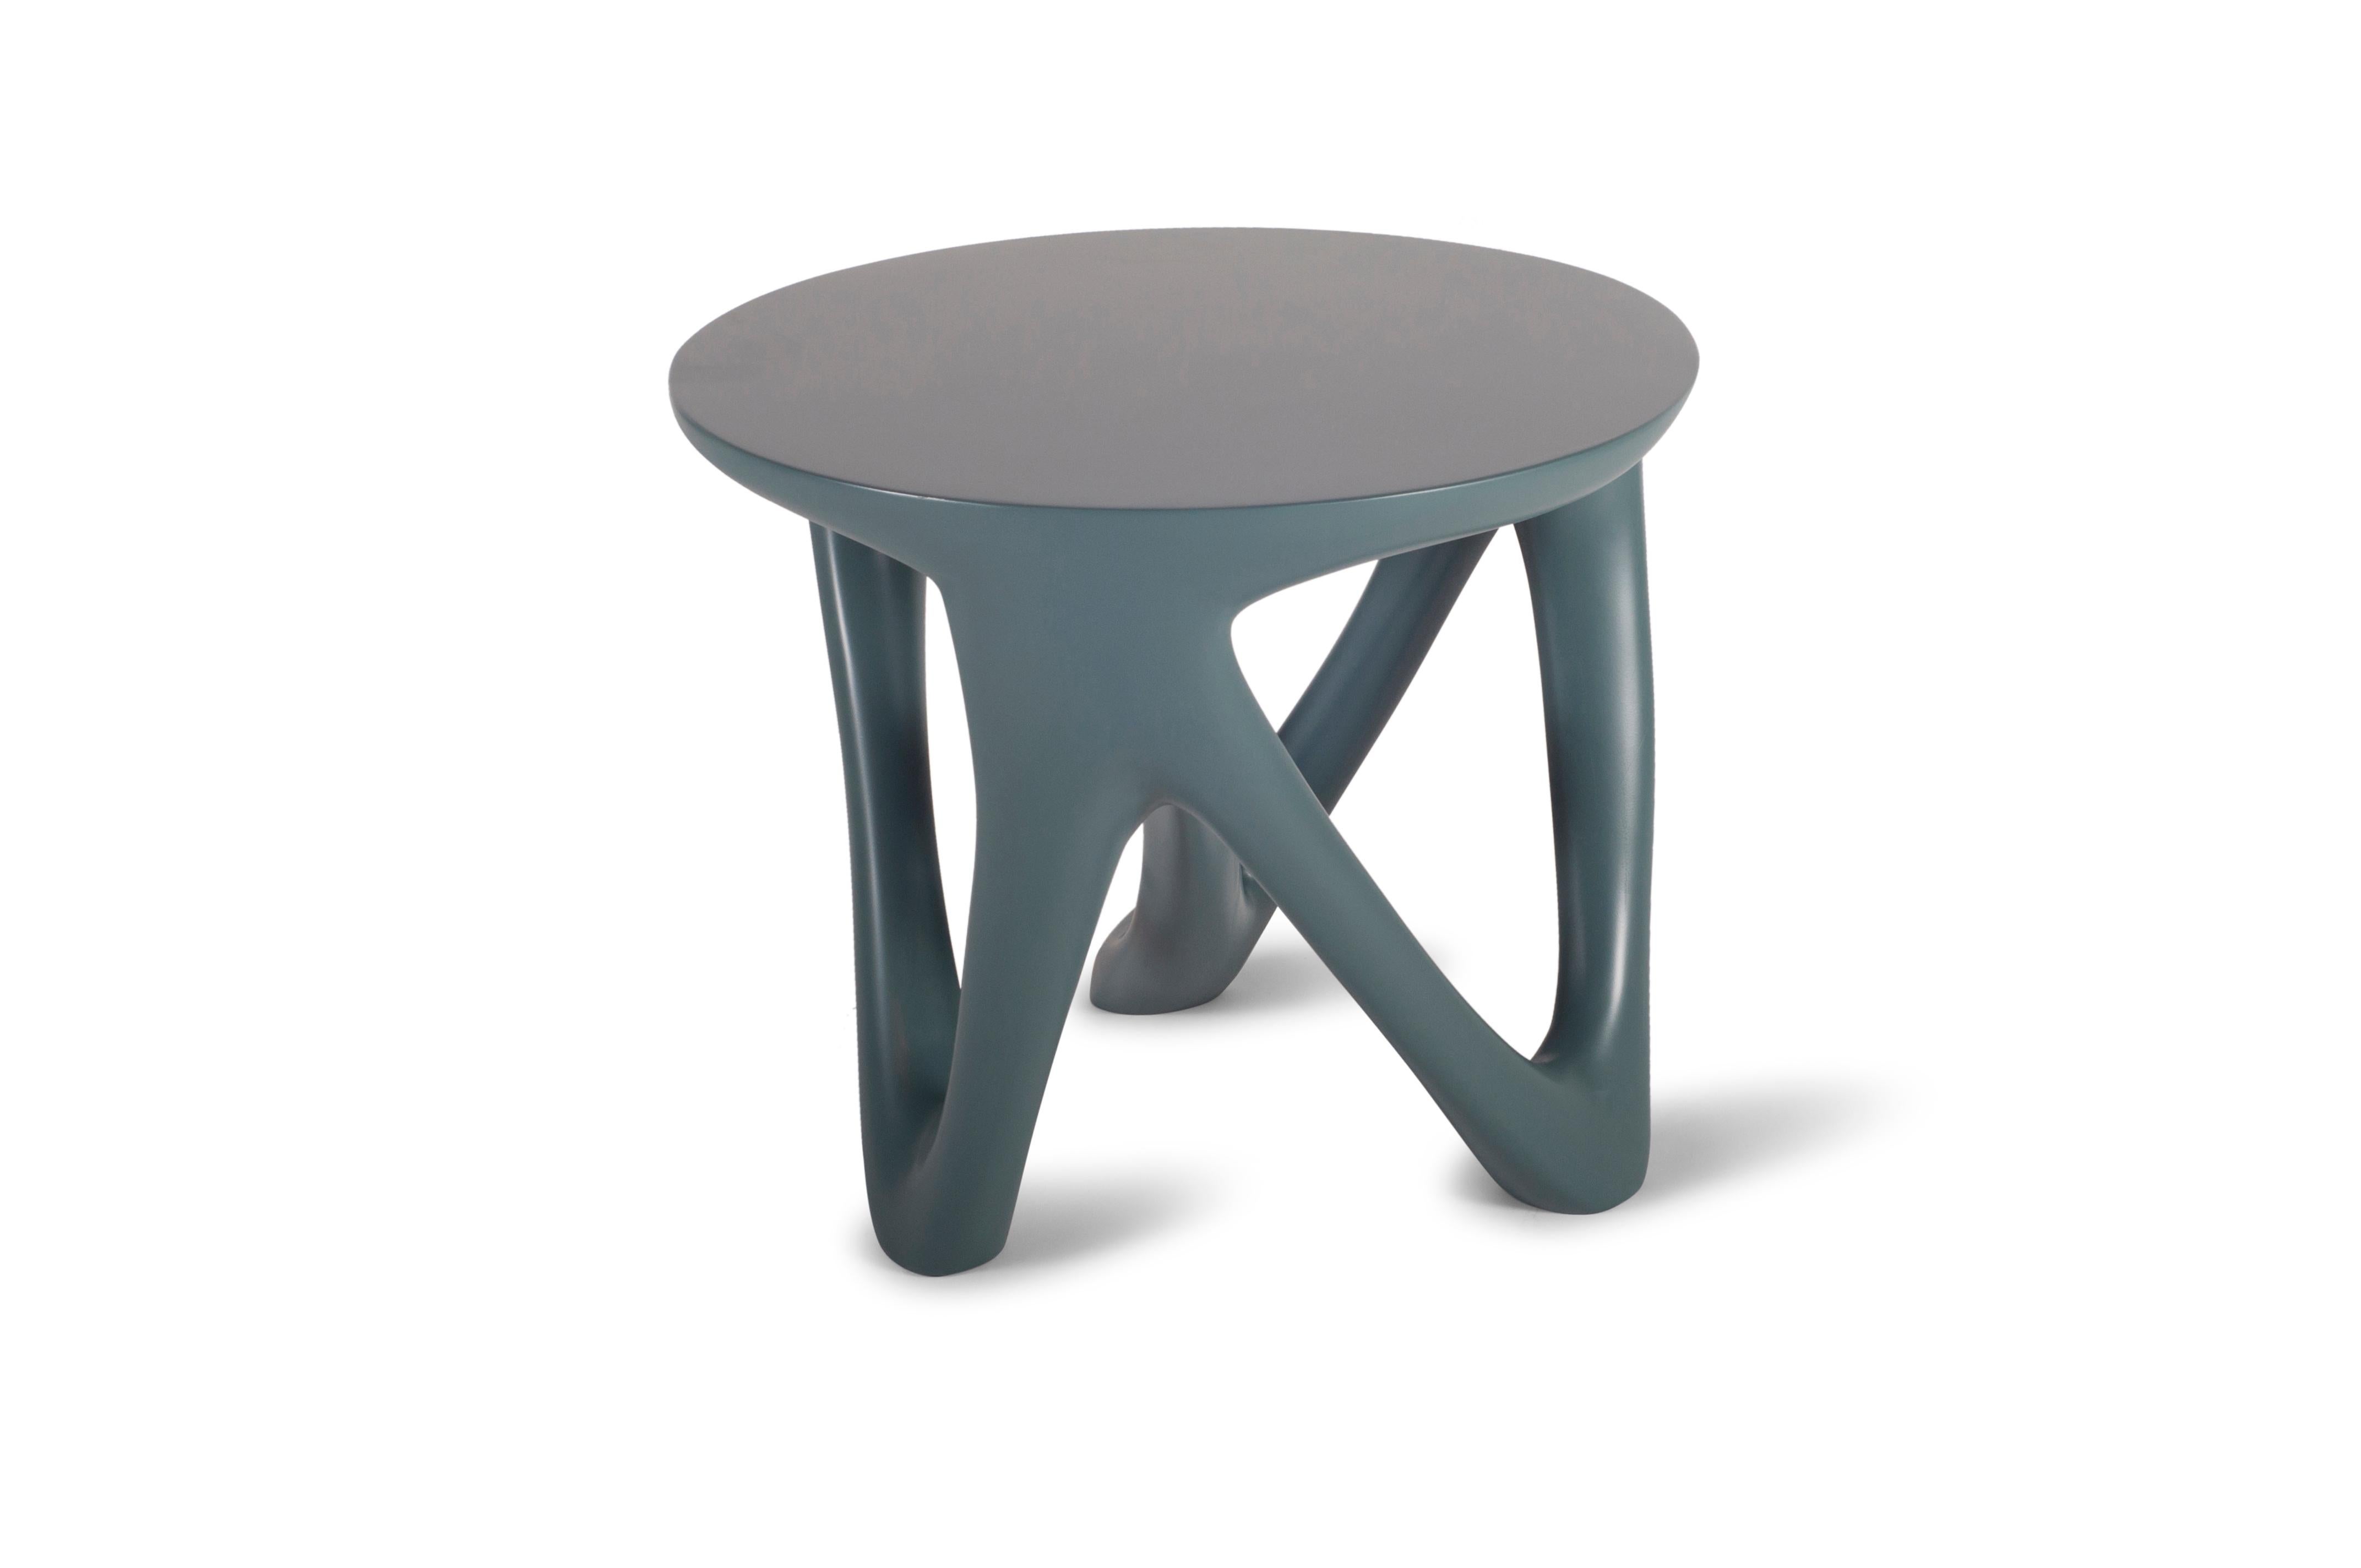 Painted Amorph Ya Modern Side Table in Gray lacquer finish For Sale